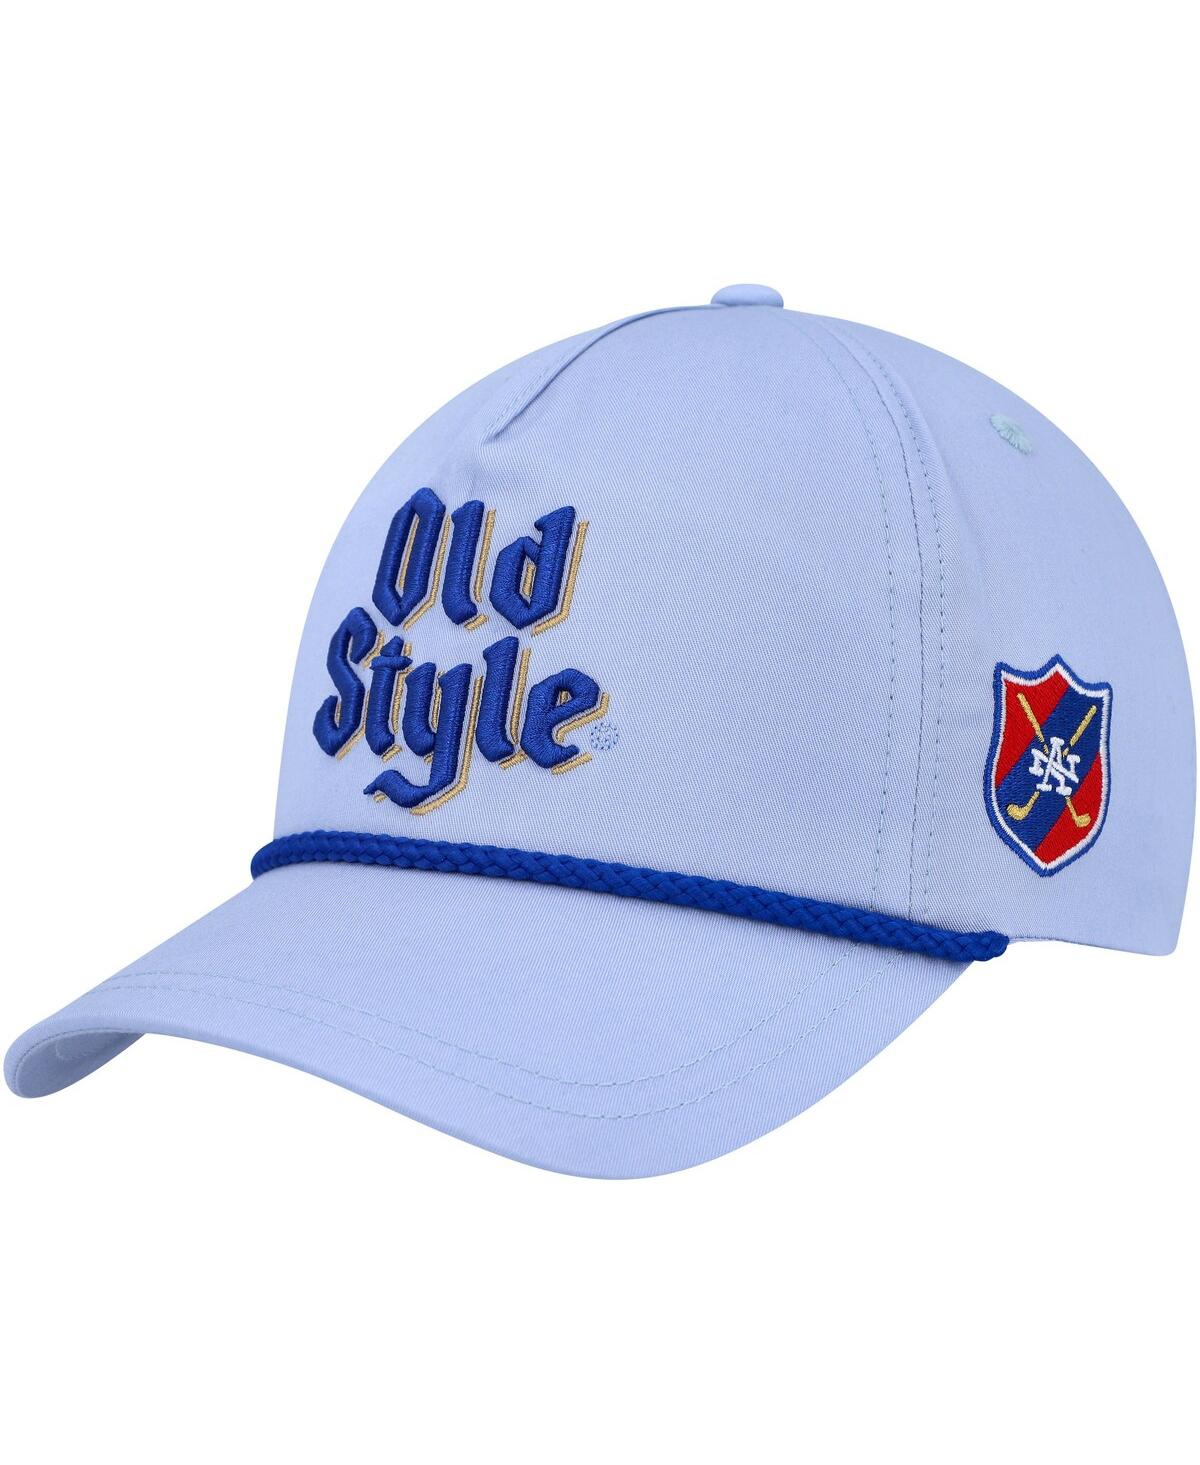 American Needle Men's  Blue Old Style Rope Snapback Hat